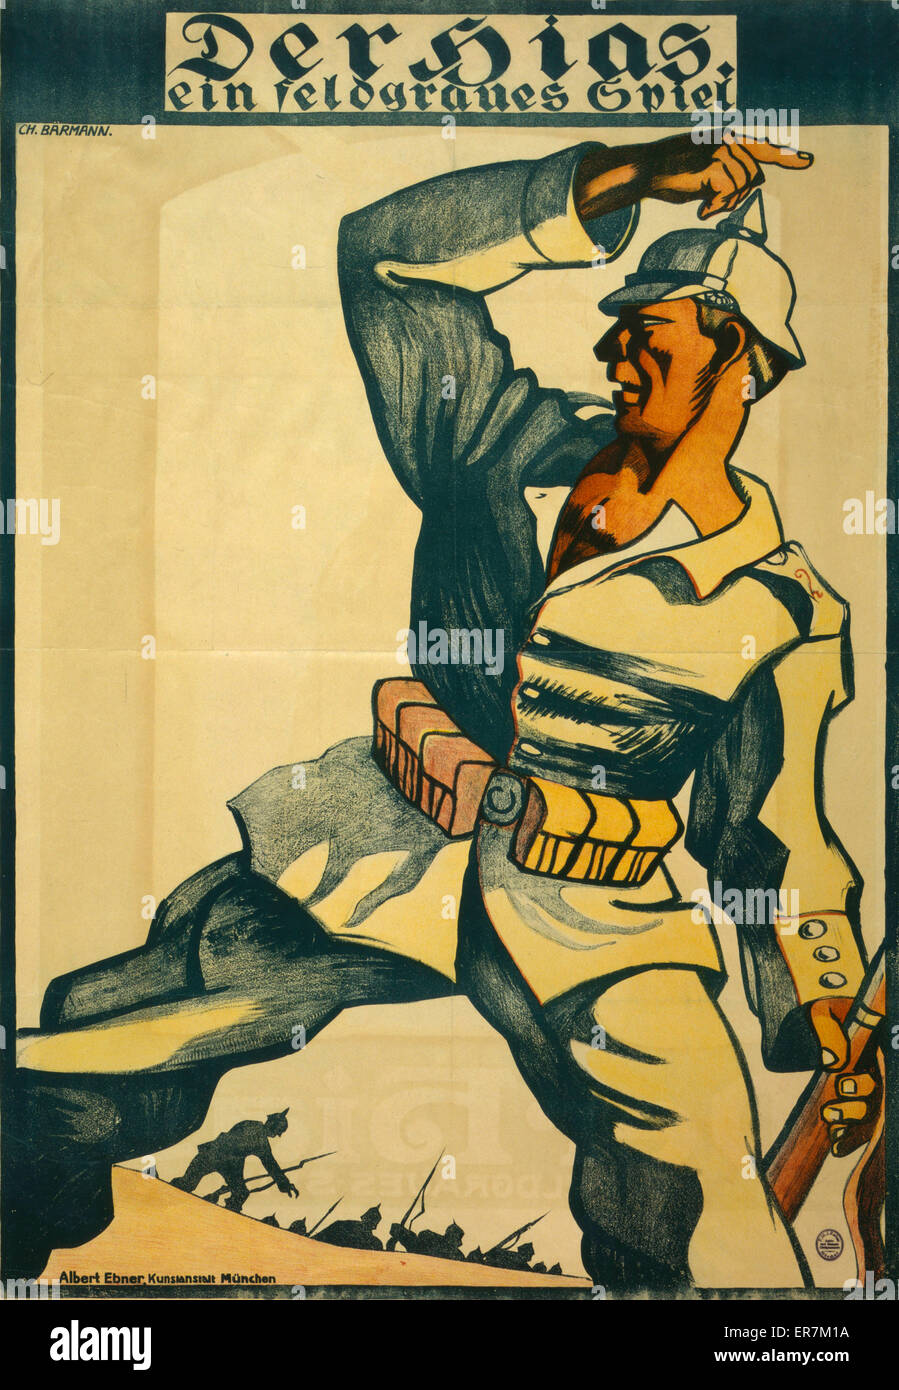 Der Hias, ein feldgraues Spiel. Poster shows a German soldier pointing the way to others silhouetted in background as though emerging from a trench. Poster is advertisement for a popular play by Heinrich Gilardone. Date 1917. Stock Photo